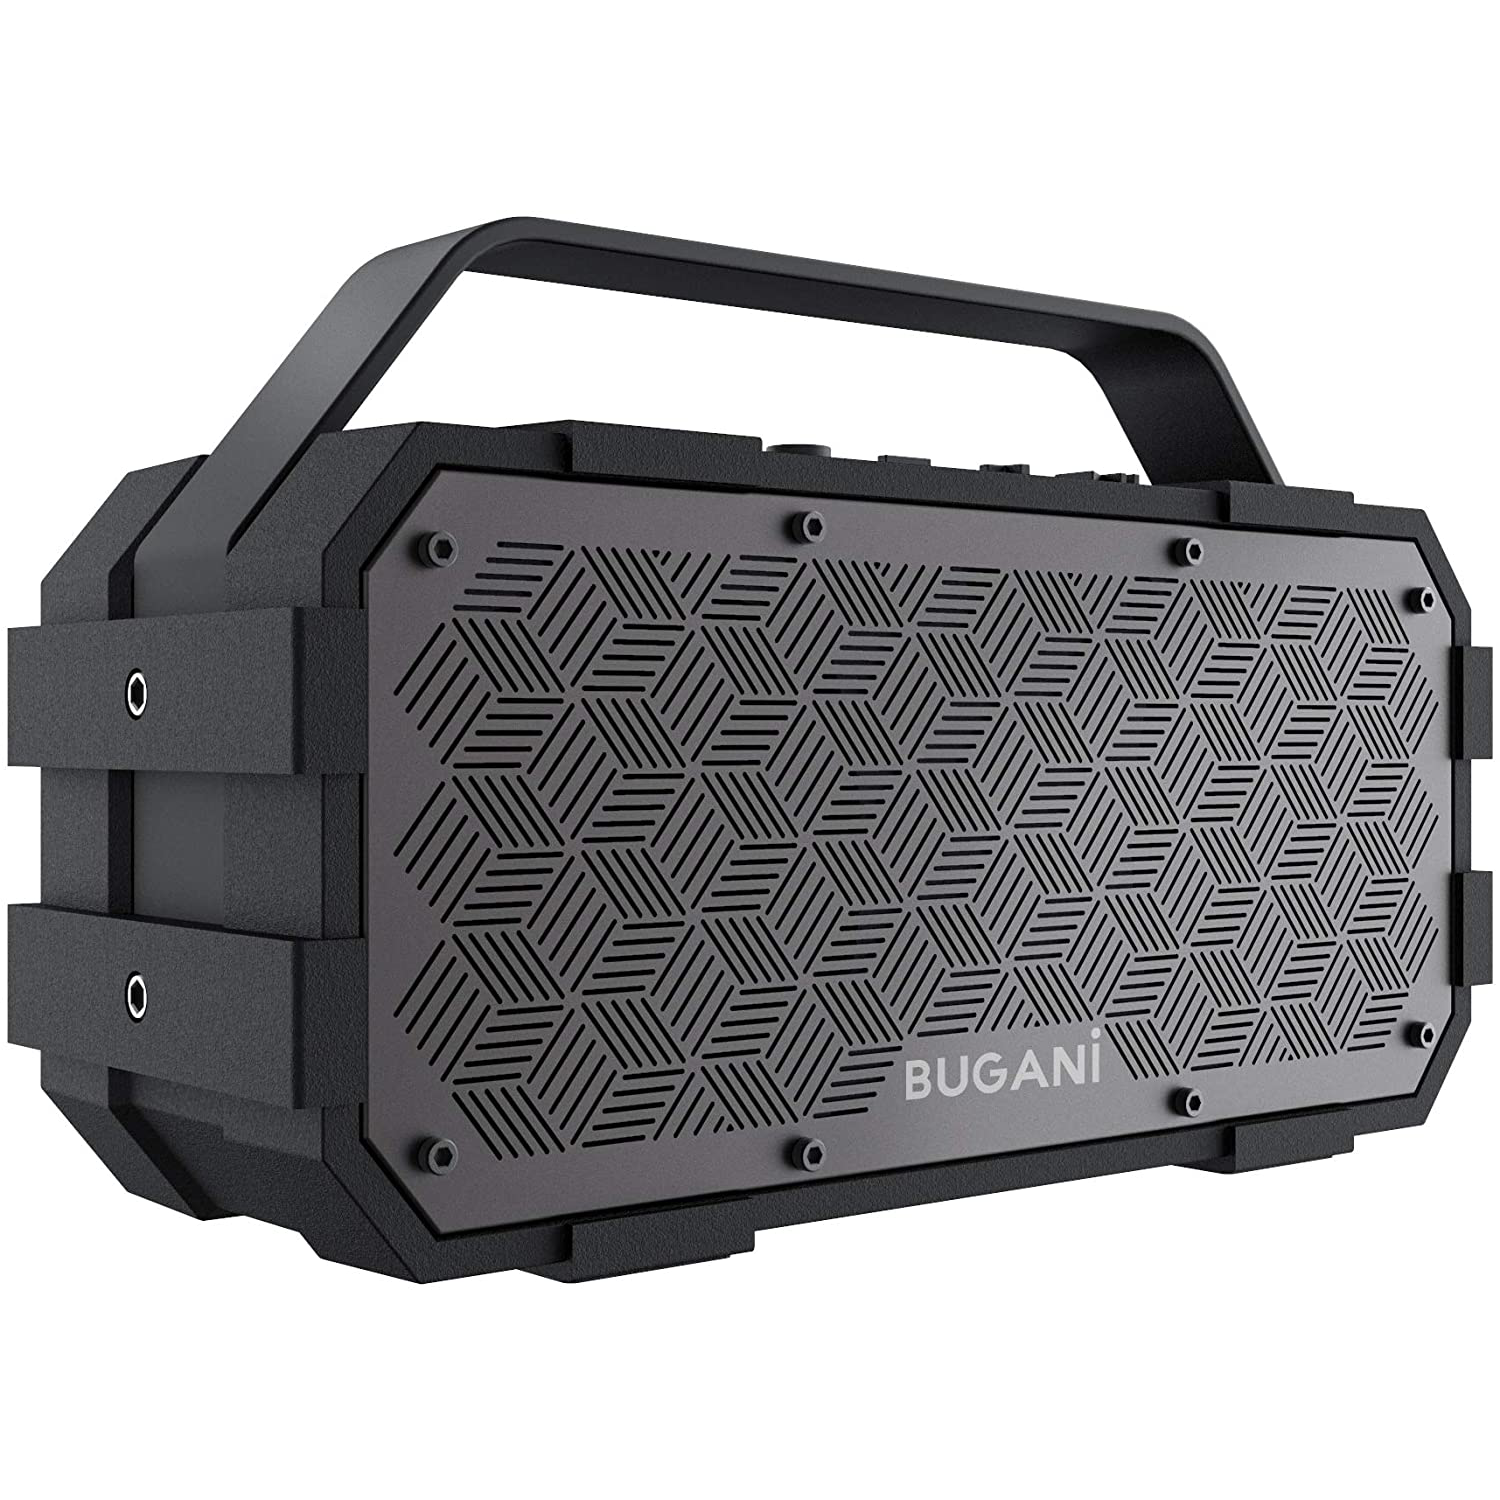 Portable Bluetooth Speaker | Stereo Sound and Deep Bass